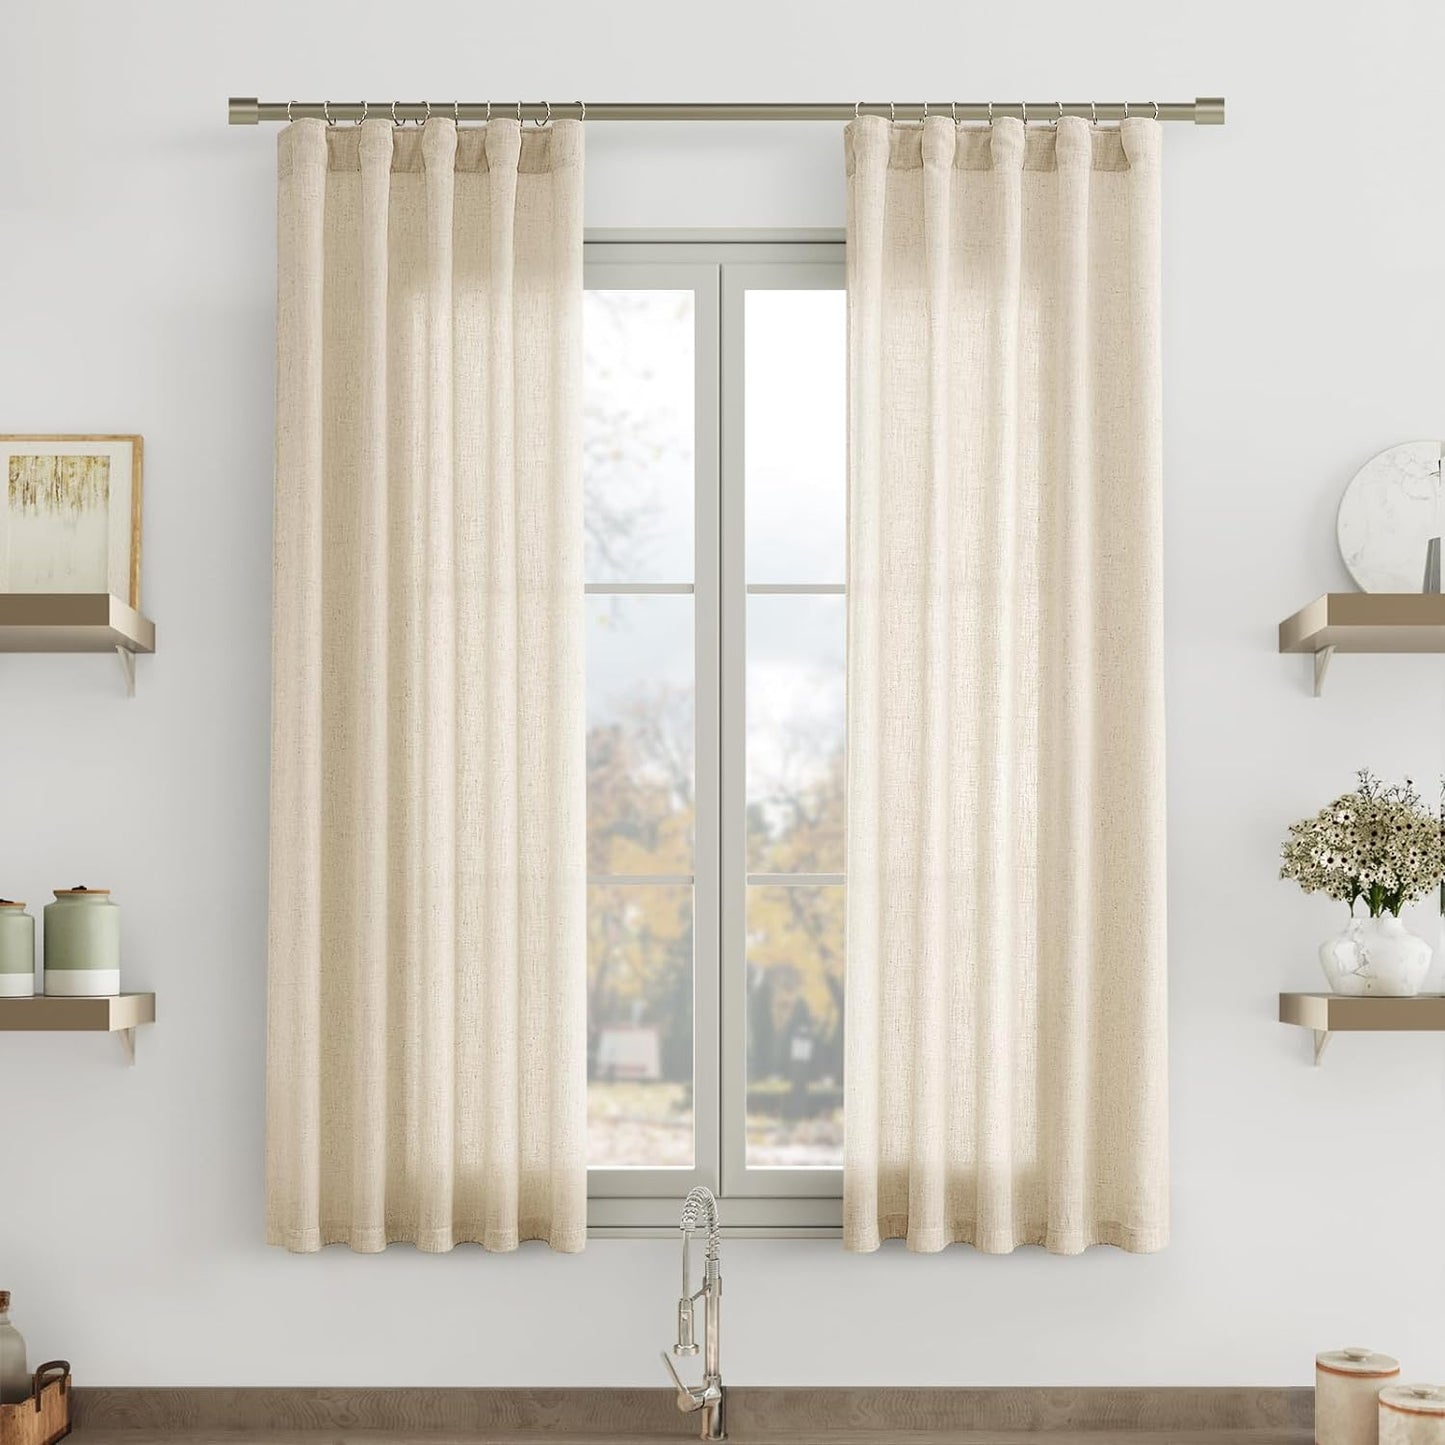 Joywell Natural Linen Cream Curtains 84 Inches Long for Living Room Bedroom Hook Belt Back Tab Pinch Pleated Light Filtering Ivory White Neutral Boho Modern Farmhouse Linen Drapes 84 Length 2 Panels  Joywell Sand Beige 38W X 54L Inch X 2 Panels 